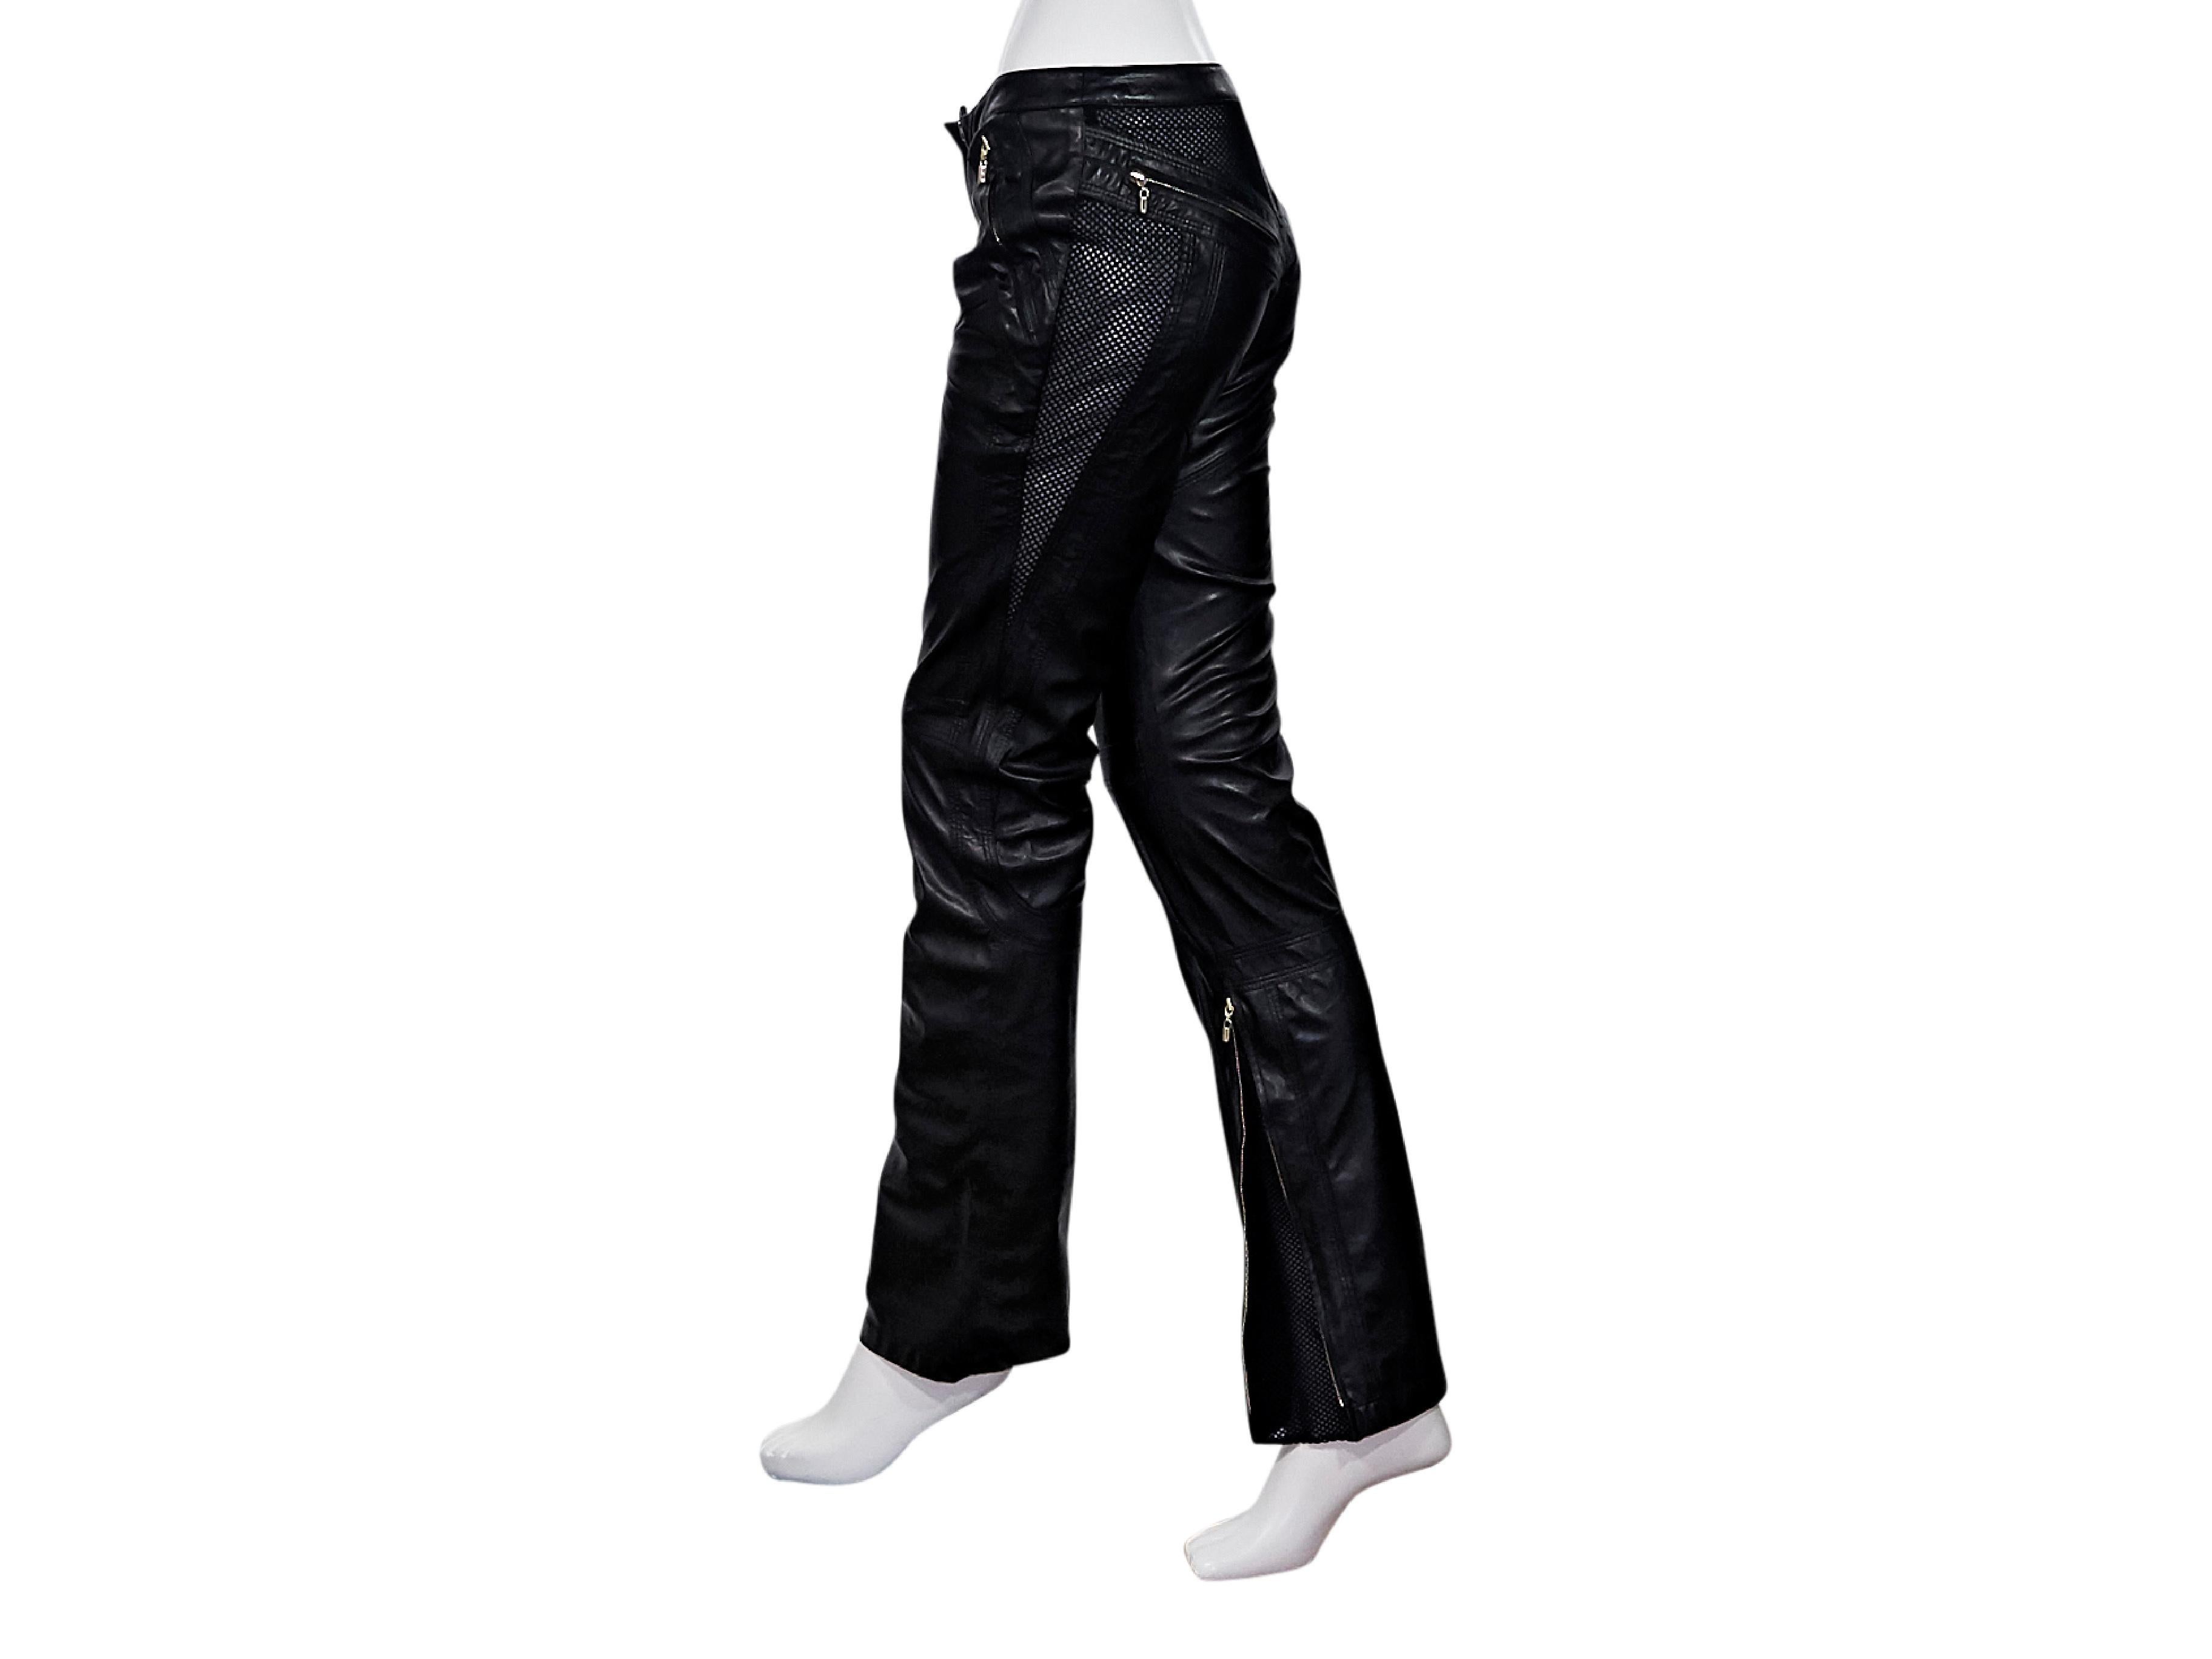 Product details:  Black leather pants by Gianni Versace Couture.  Accented with mesh panels.  Concealed hook closure with zip fly.  Waist and back zip pockets.  Inner hem with zipprer plackets.  Goldtone hardware.  28